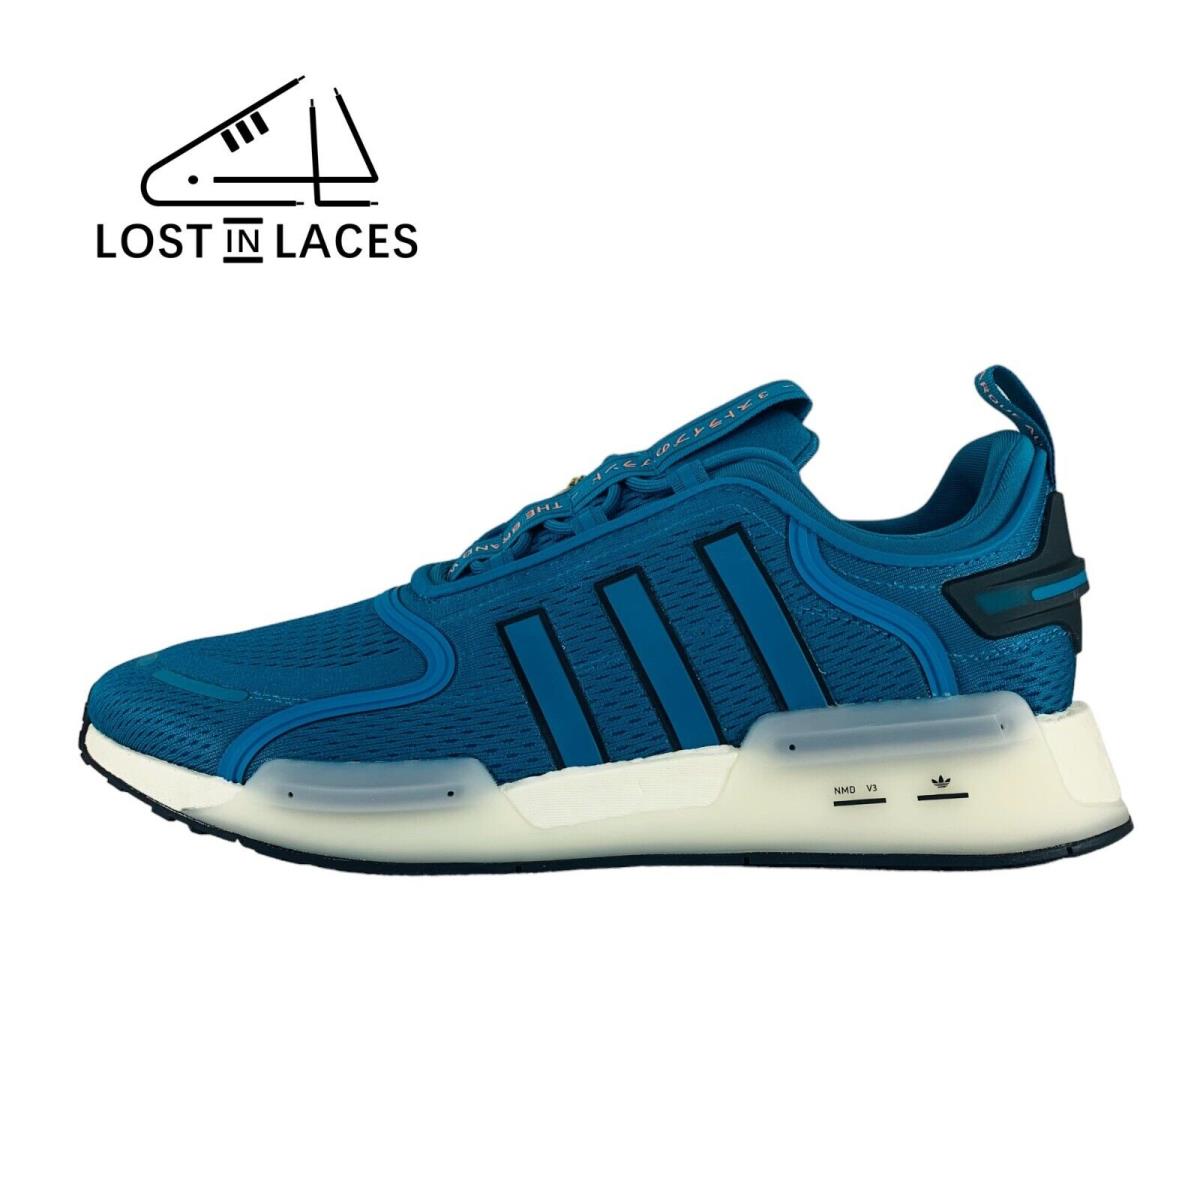 Adidas NMD_V3 Active Teal White Sneakers Lifestyle Shoes Men`s Sizes